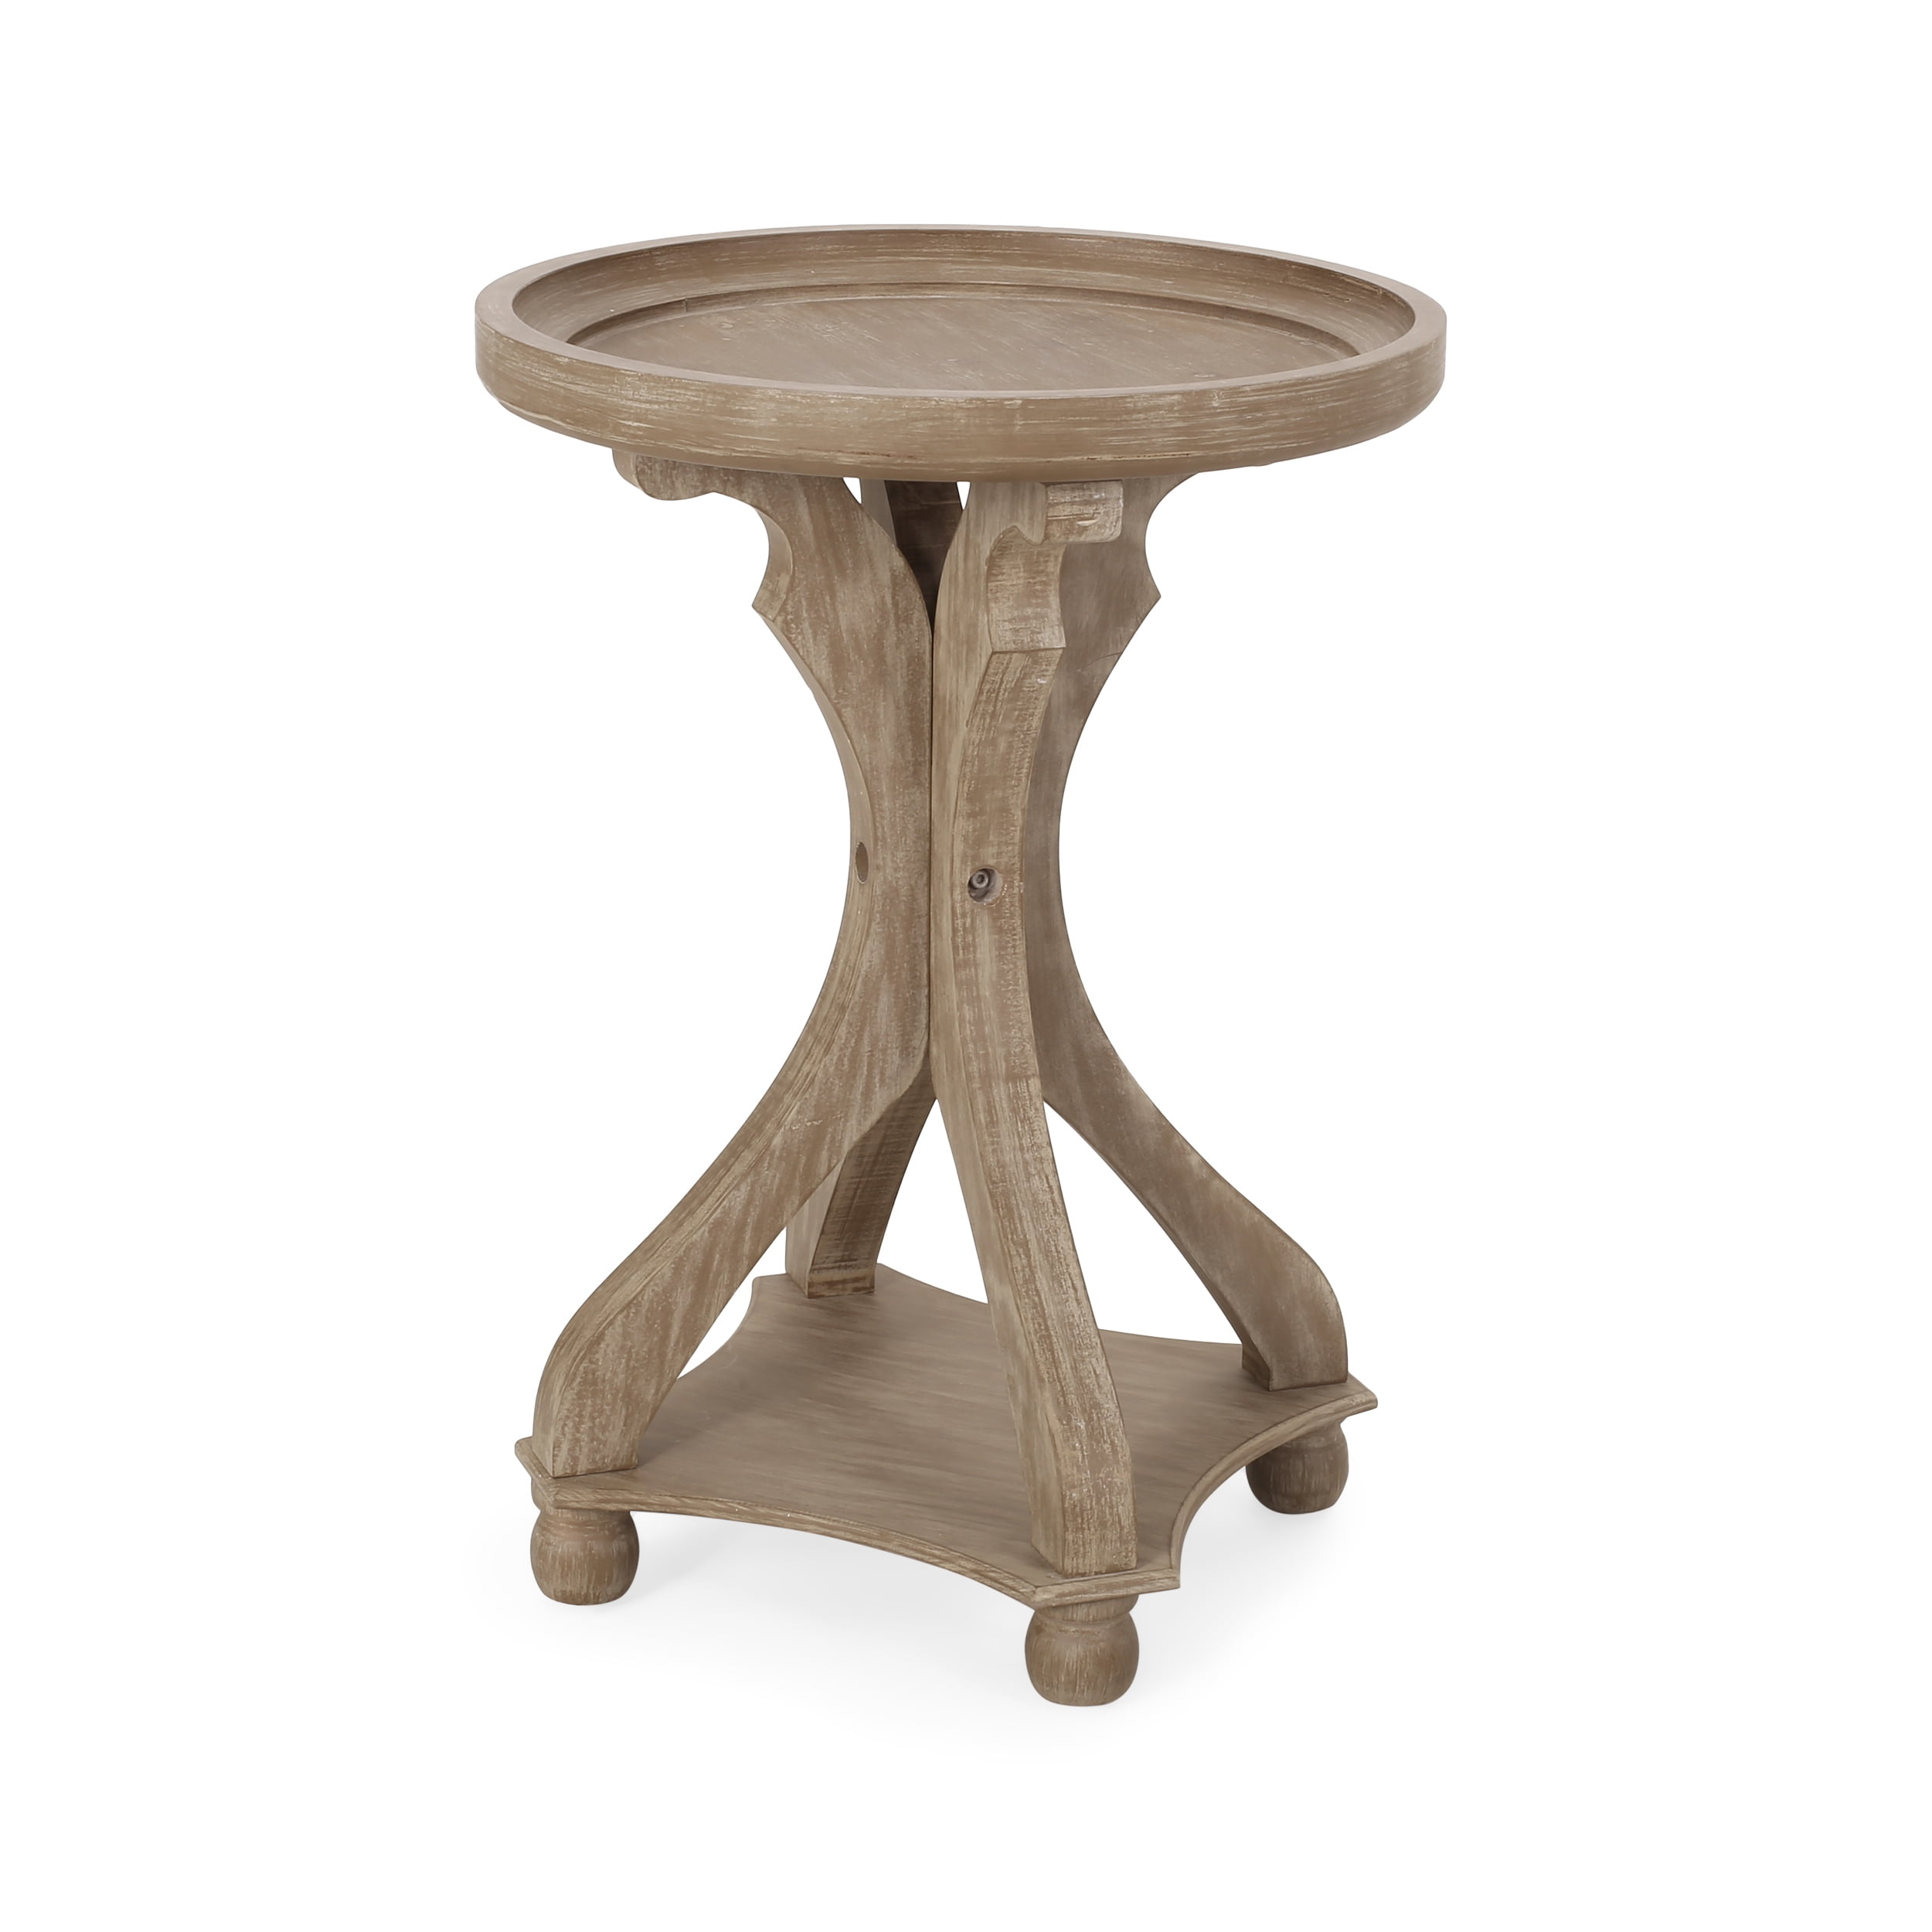 Frenchi Home Furnishing Round End Table